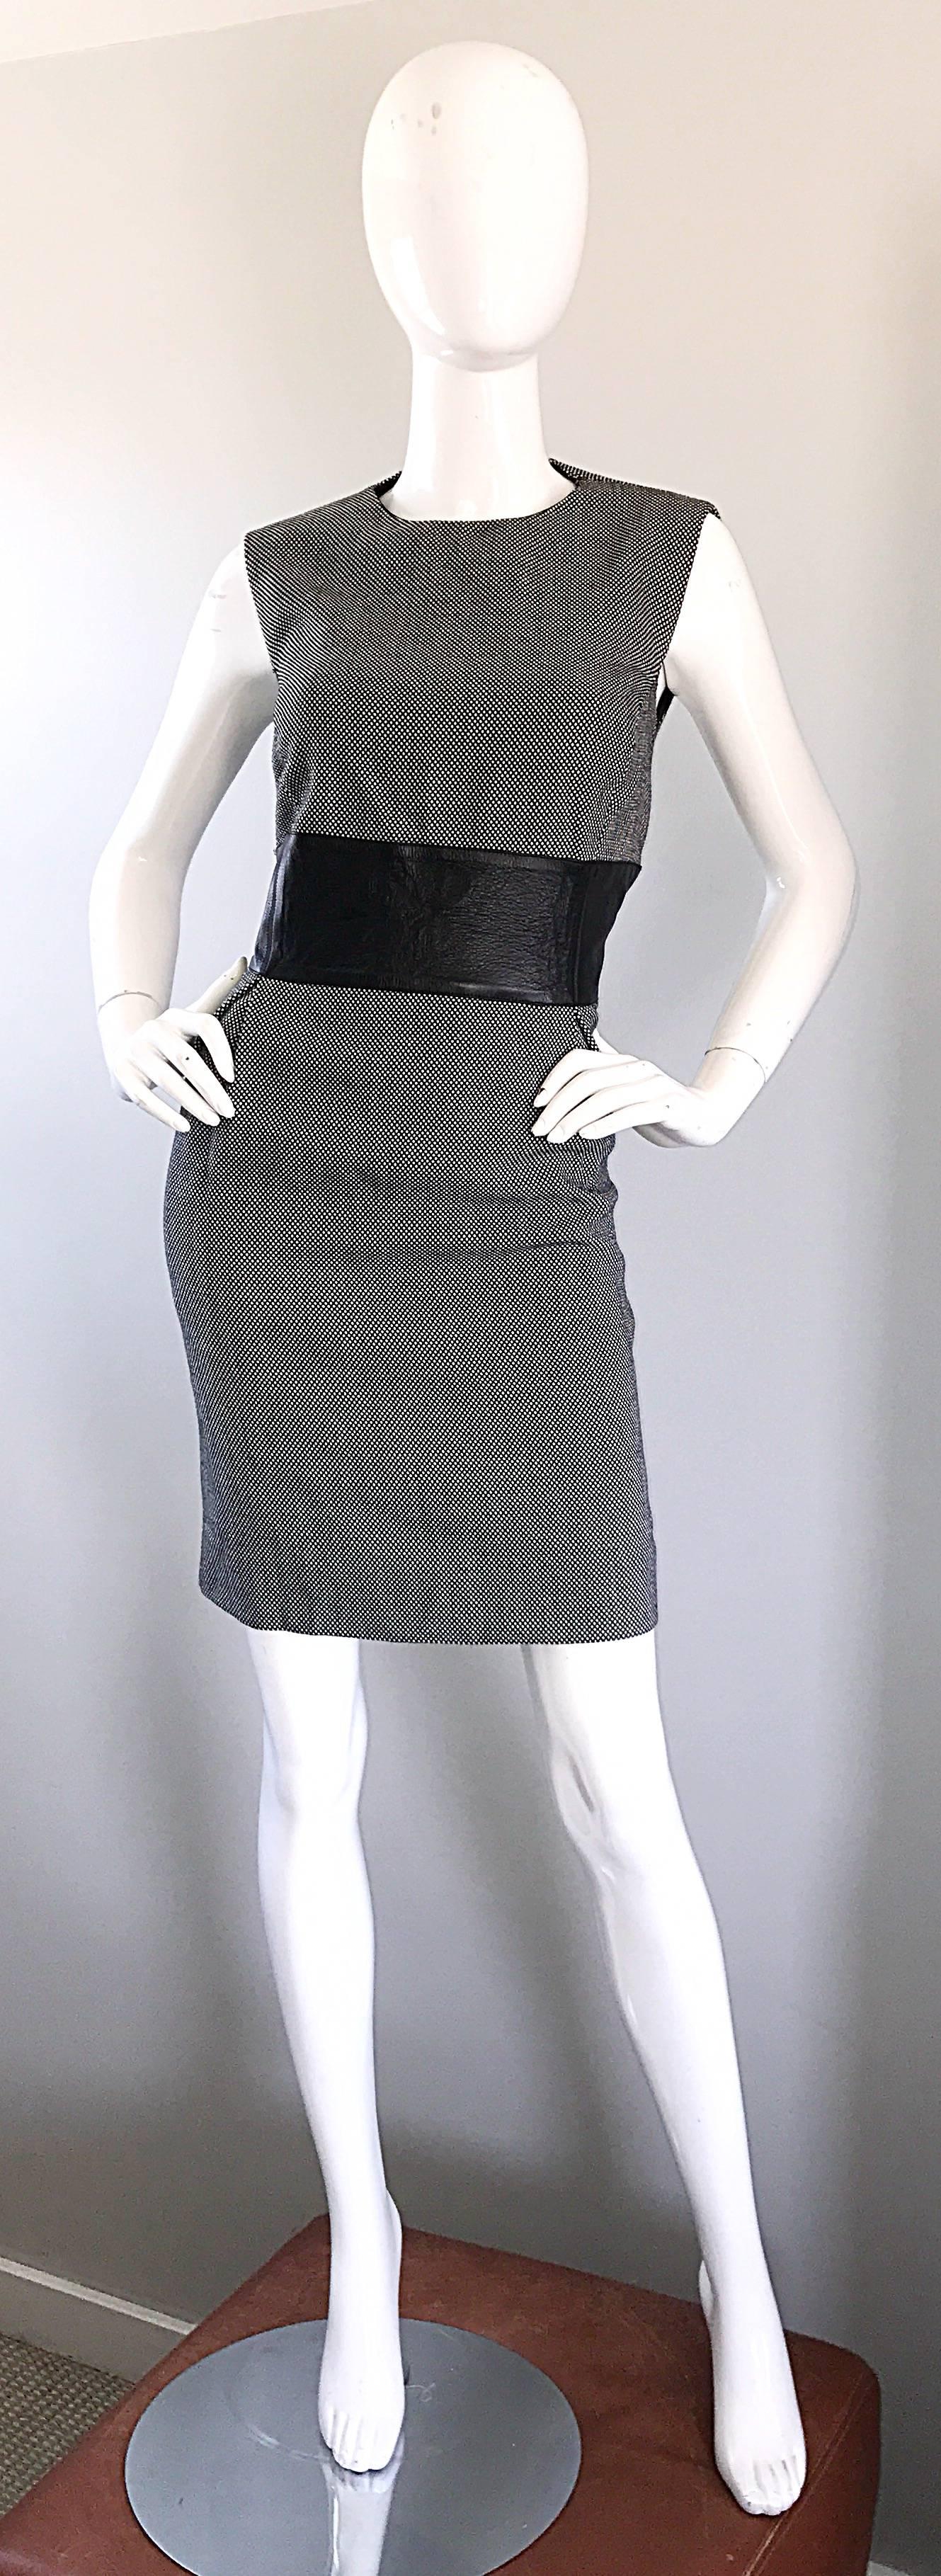 Brand new MICHAEL KORS COLLECTION black and white virgin wool and leather dress! Classic style that is very figure flattering. Soft lightweight black and white wool body, with a flattering wide blackl leather band across the front and back waist.